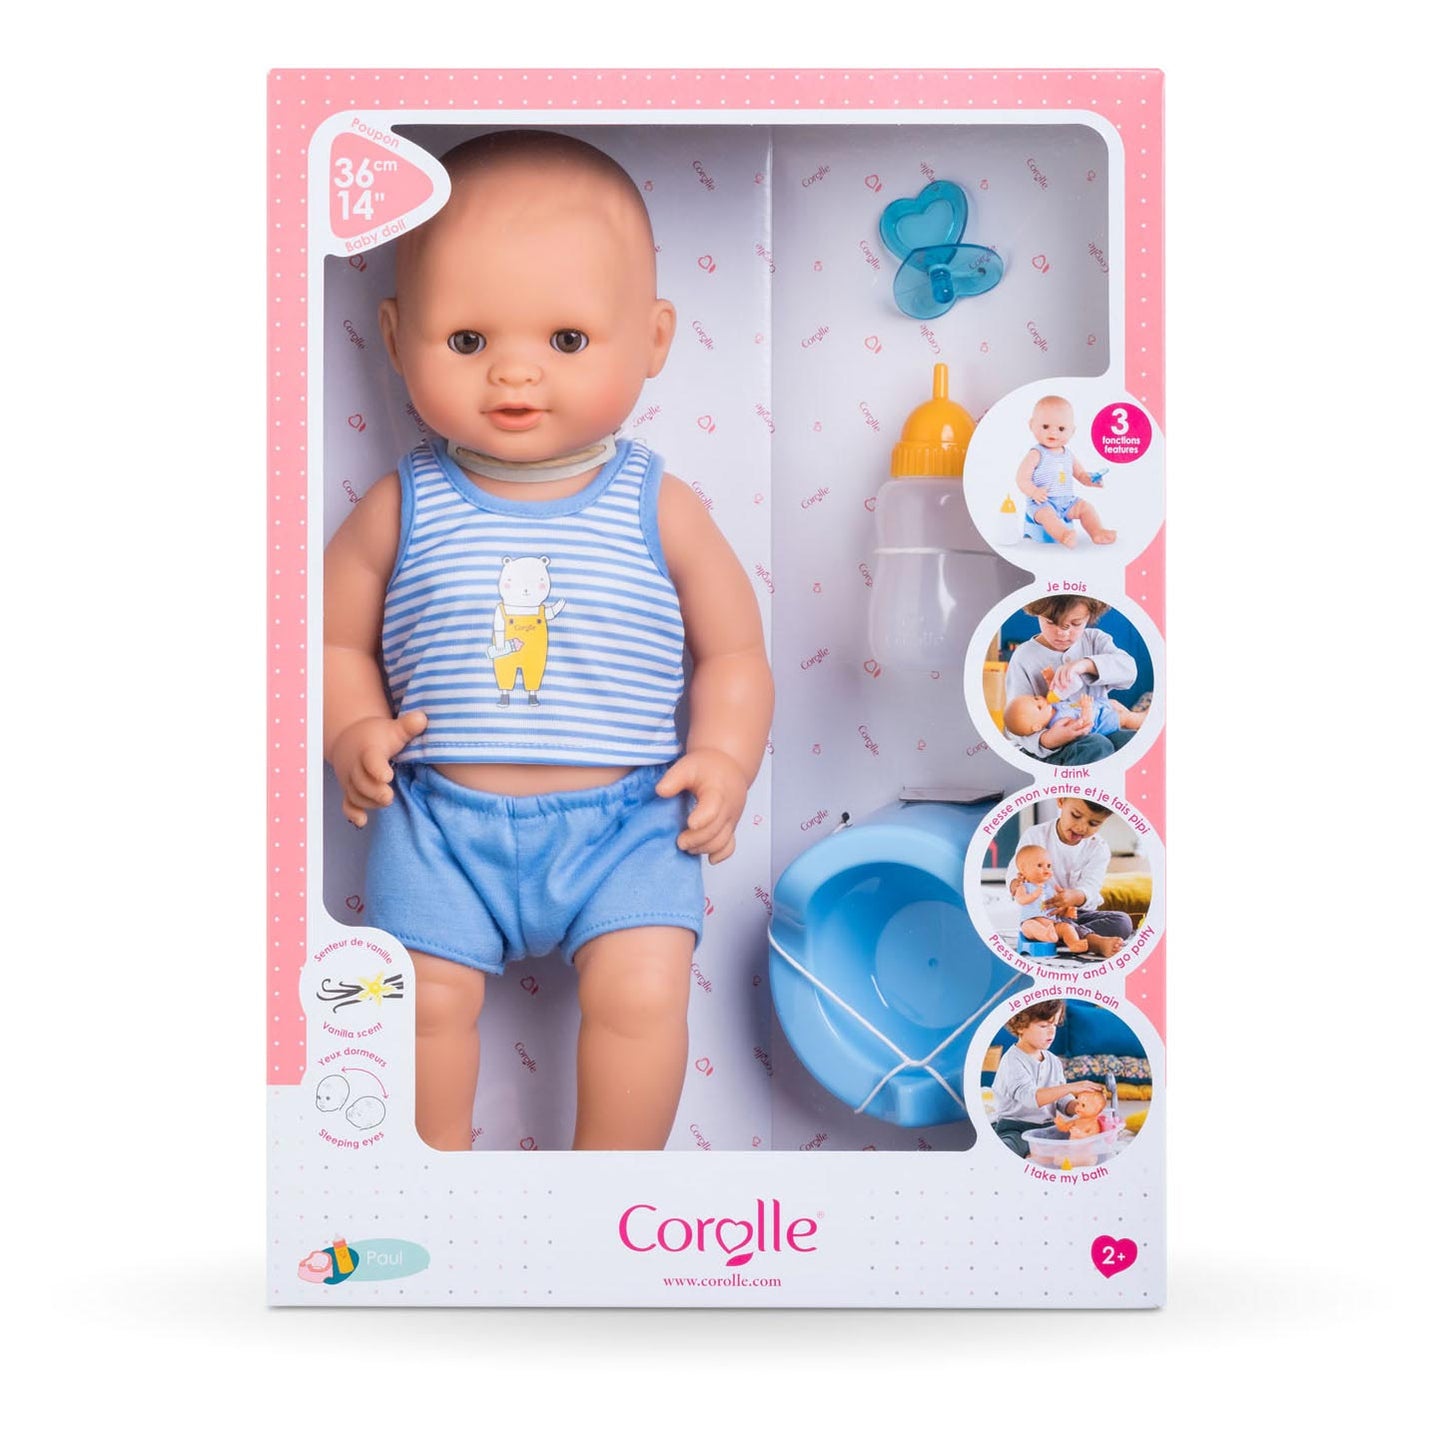 Paul Drink and Wet Bath Baby Doll 14"